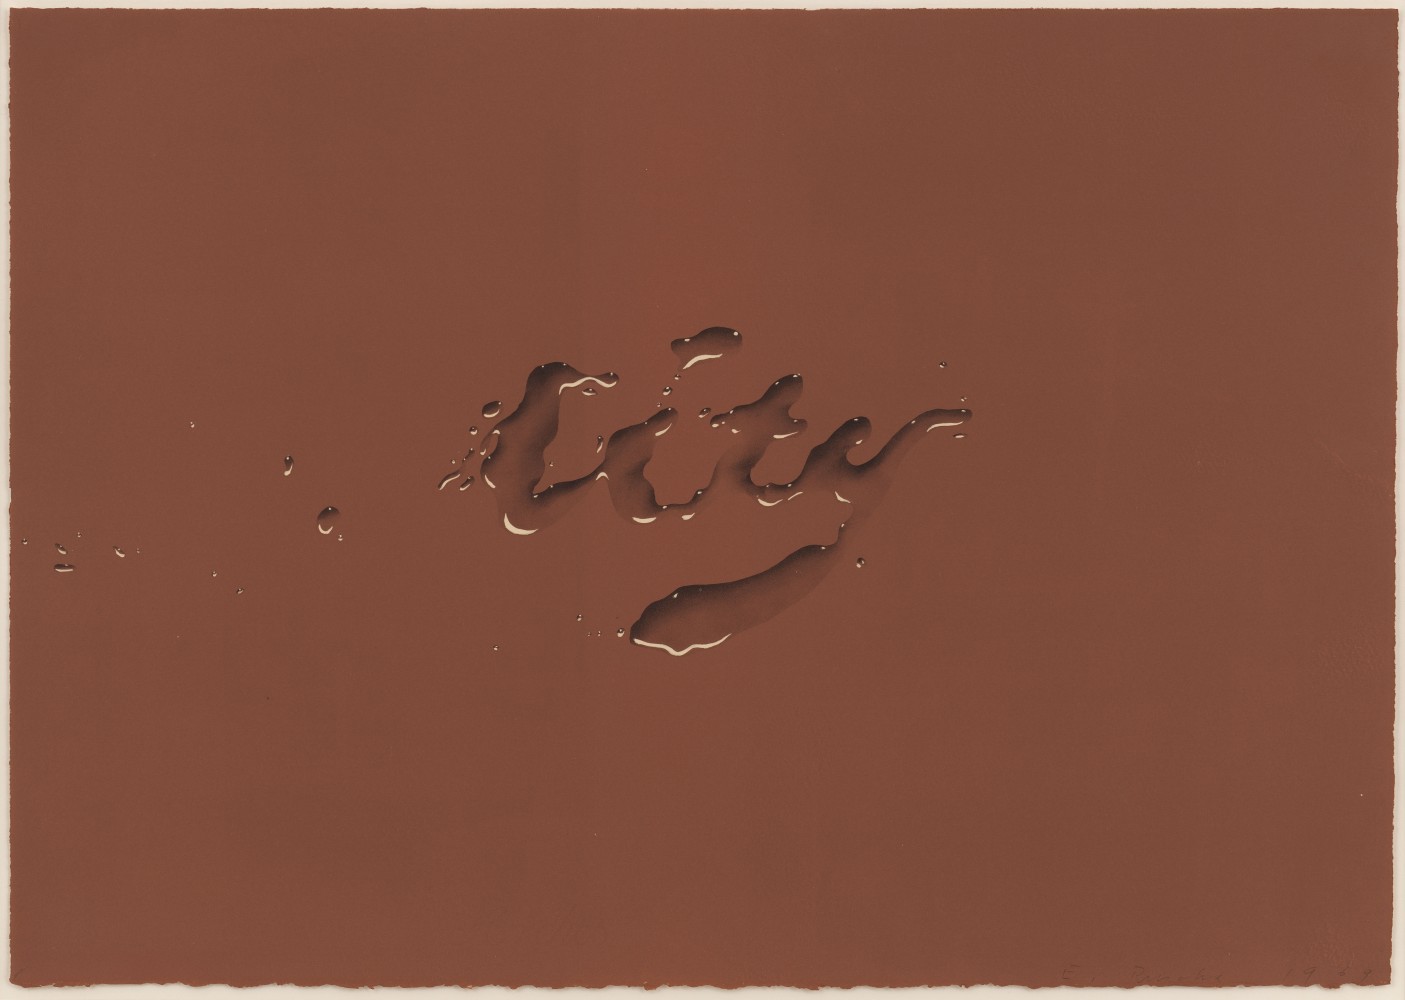 Ed Ruscha (b. 1937)

City, 1969

Lithograph on calendered Rives BFK paper

17 x 24 inches

Unique color trial proof